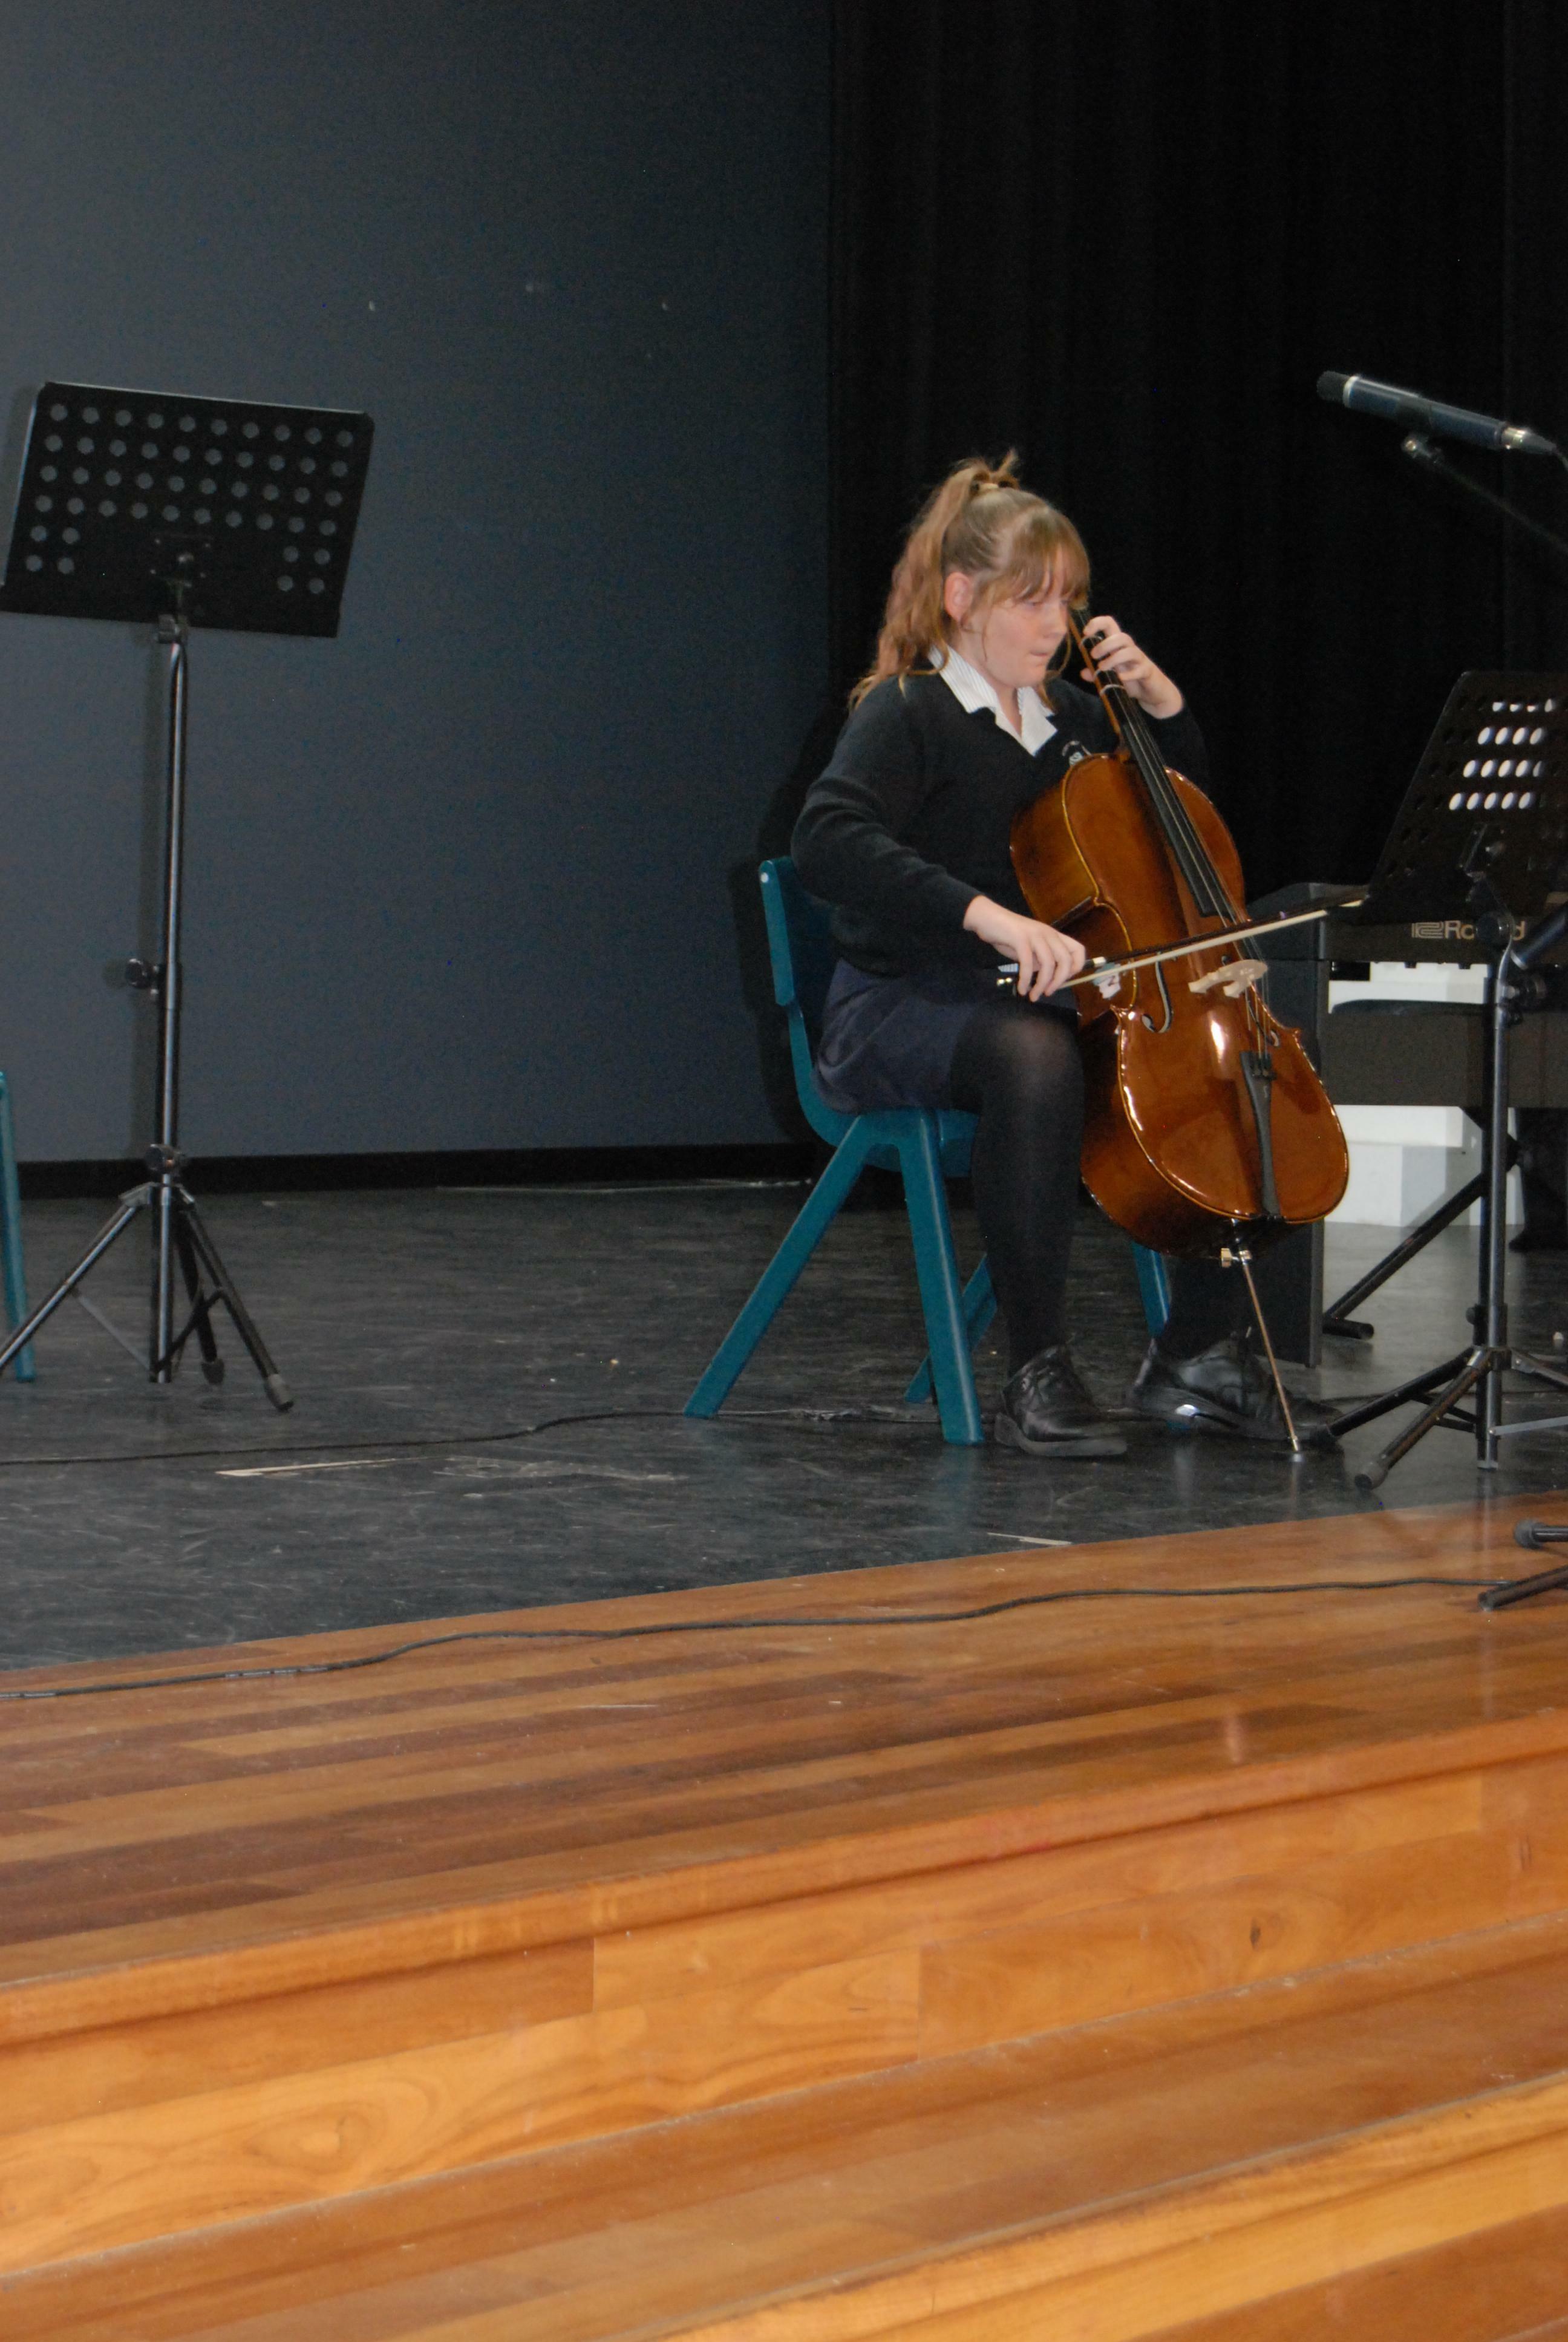 Musical performances assembly3